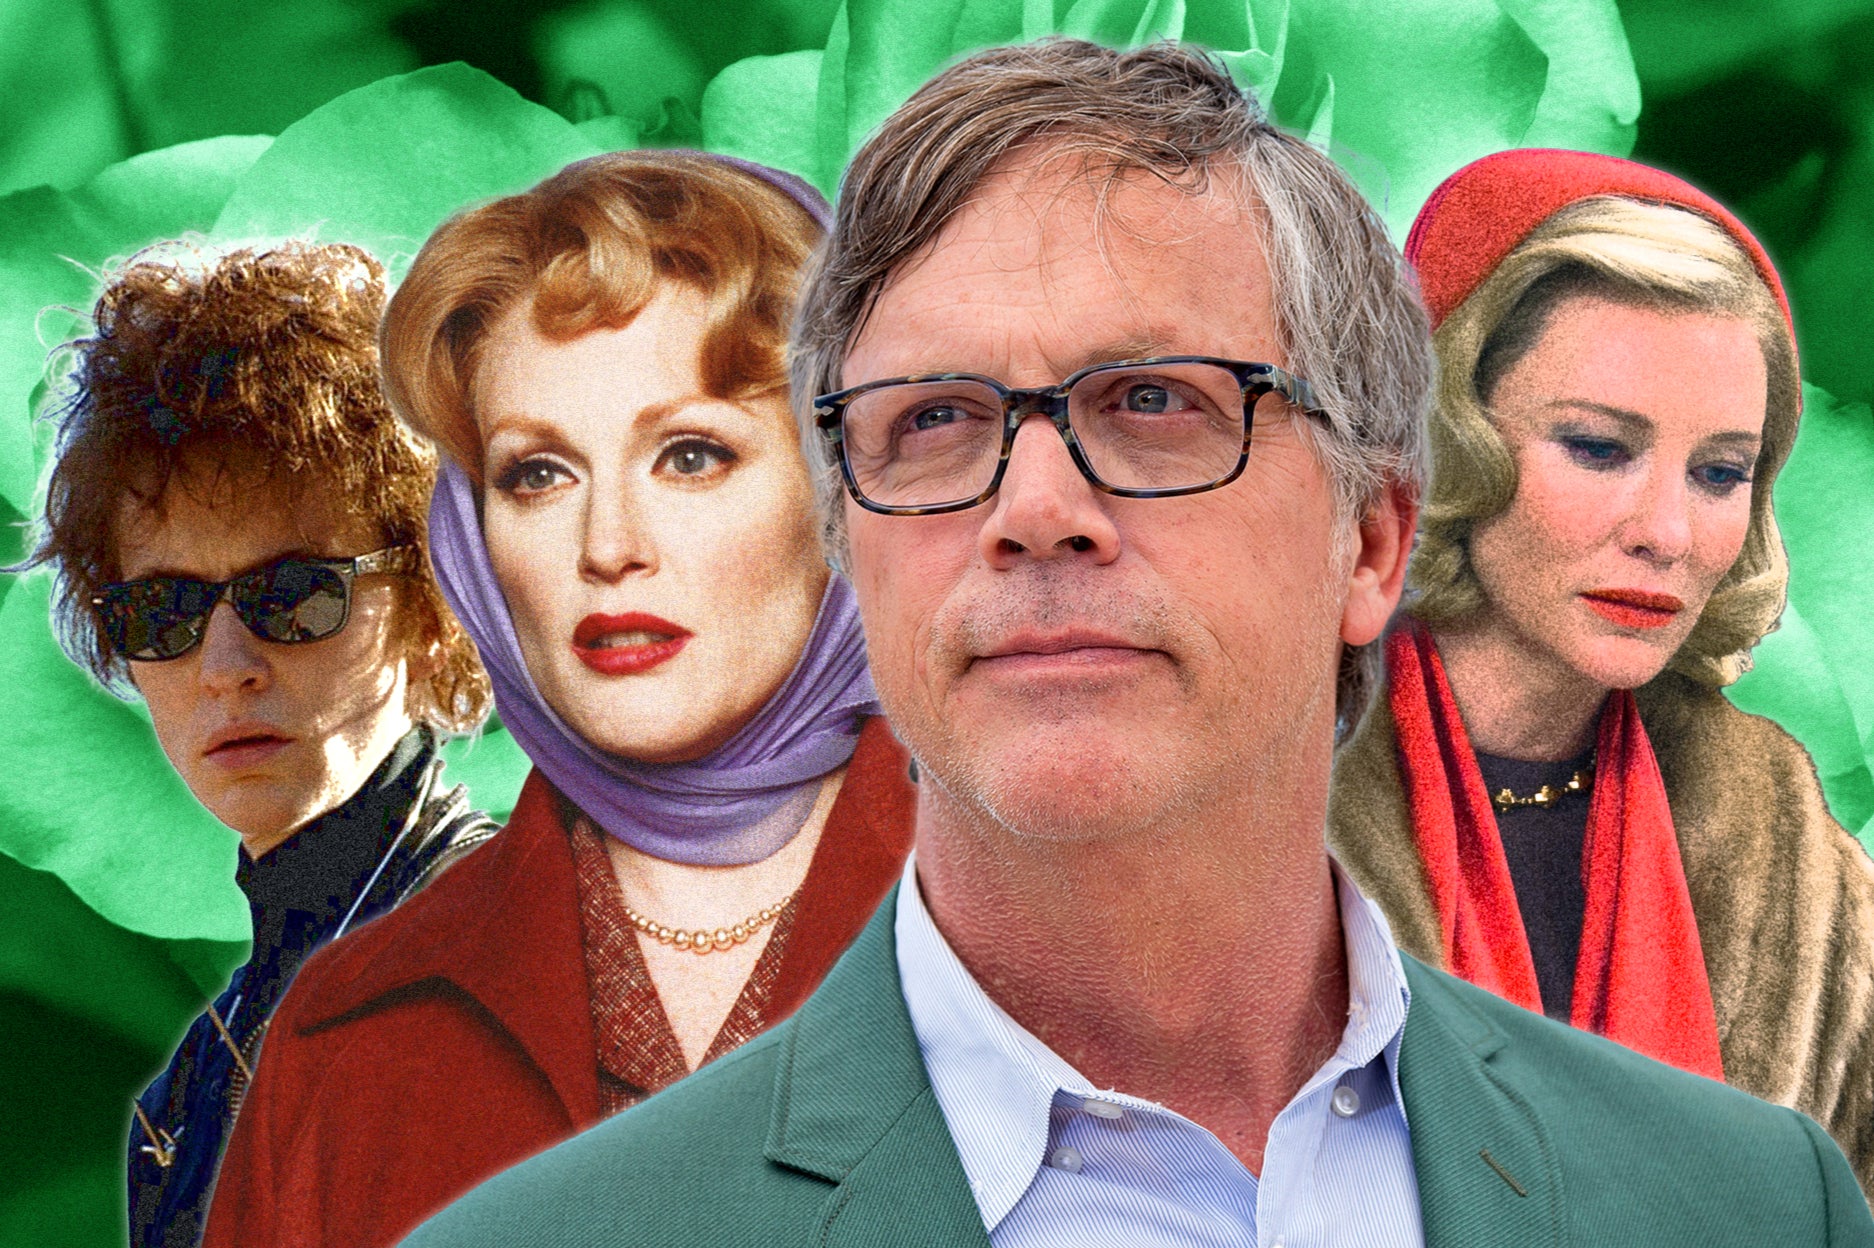 ‘The best movies always make you uncertain about things’: Filmmaker Todd Haynes (centre), alongside (left to right) Cate Blanchett in ‘I’m Not There’, Julianne Moore in ‘Far from Heaven’ and Blanchett in ‘Carol’